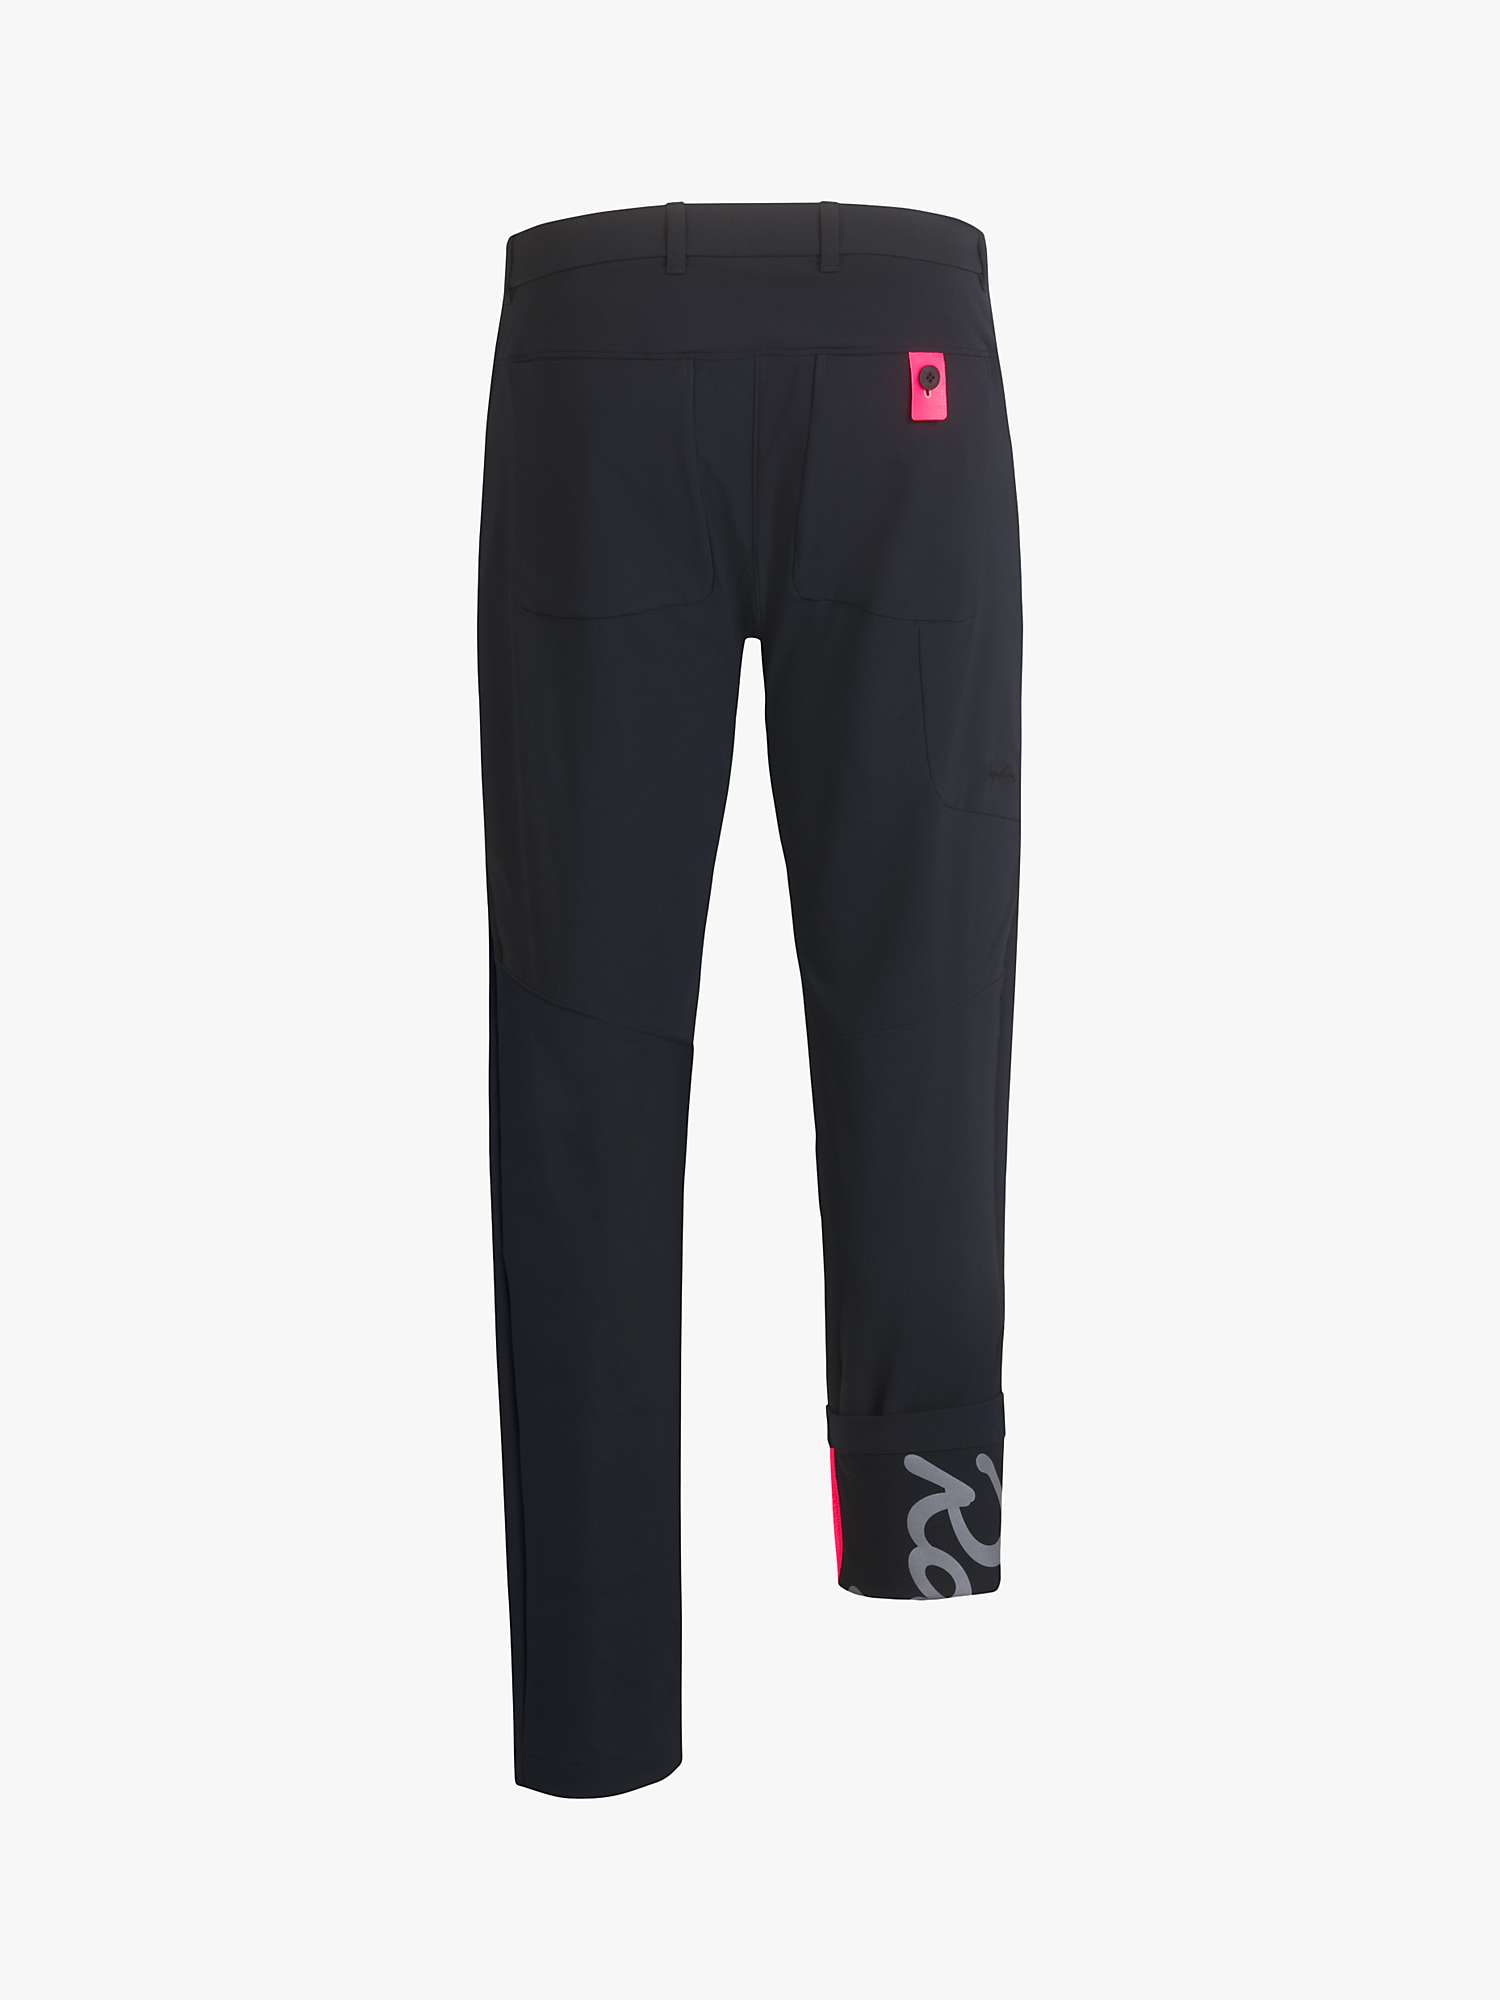 Rapha Technical Cycling Trousers at John Lewis & Partners